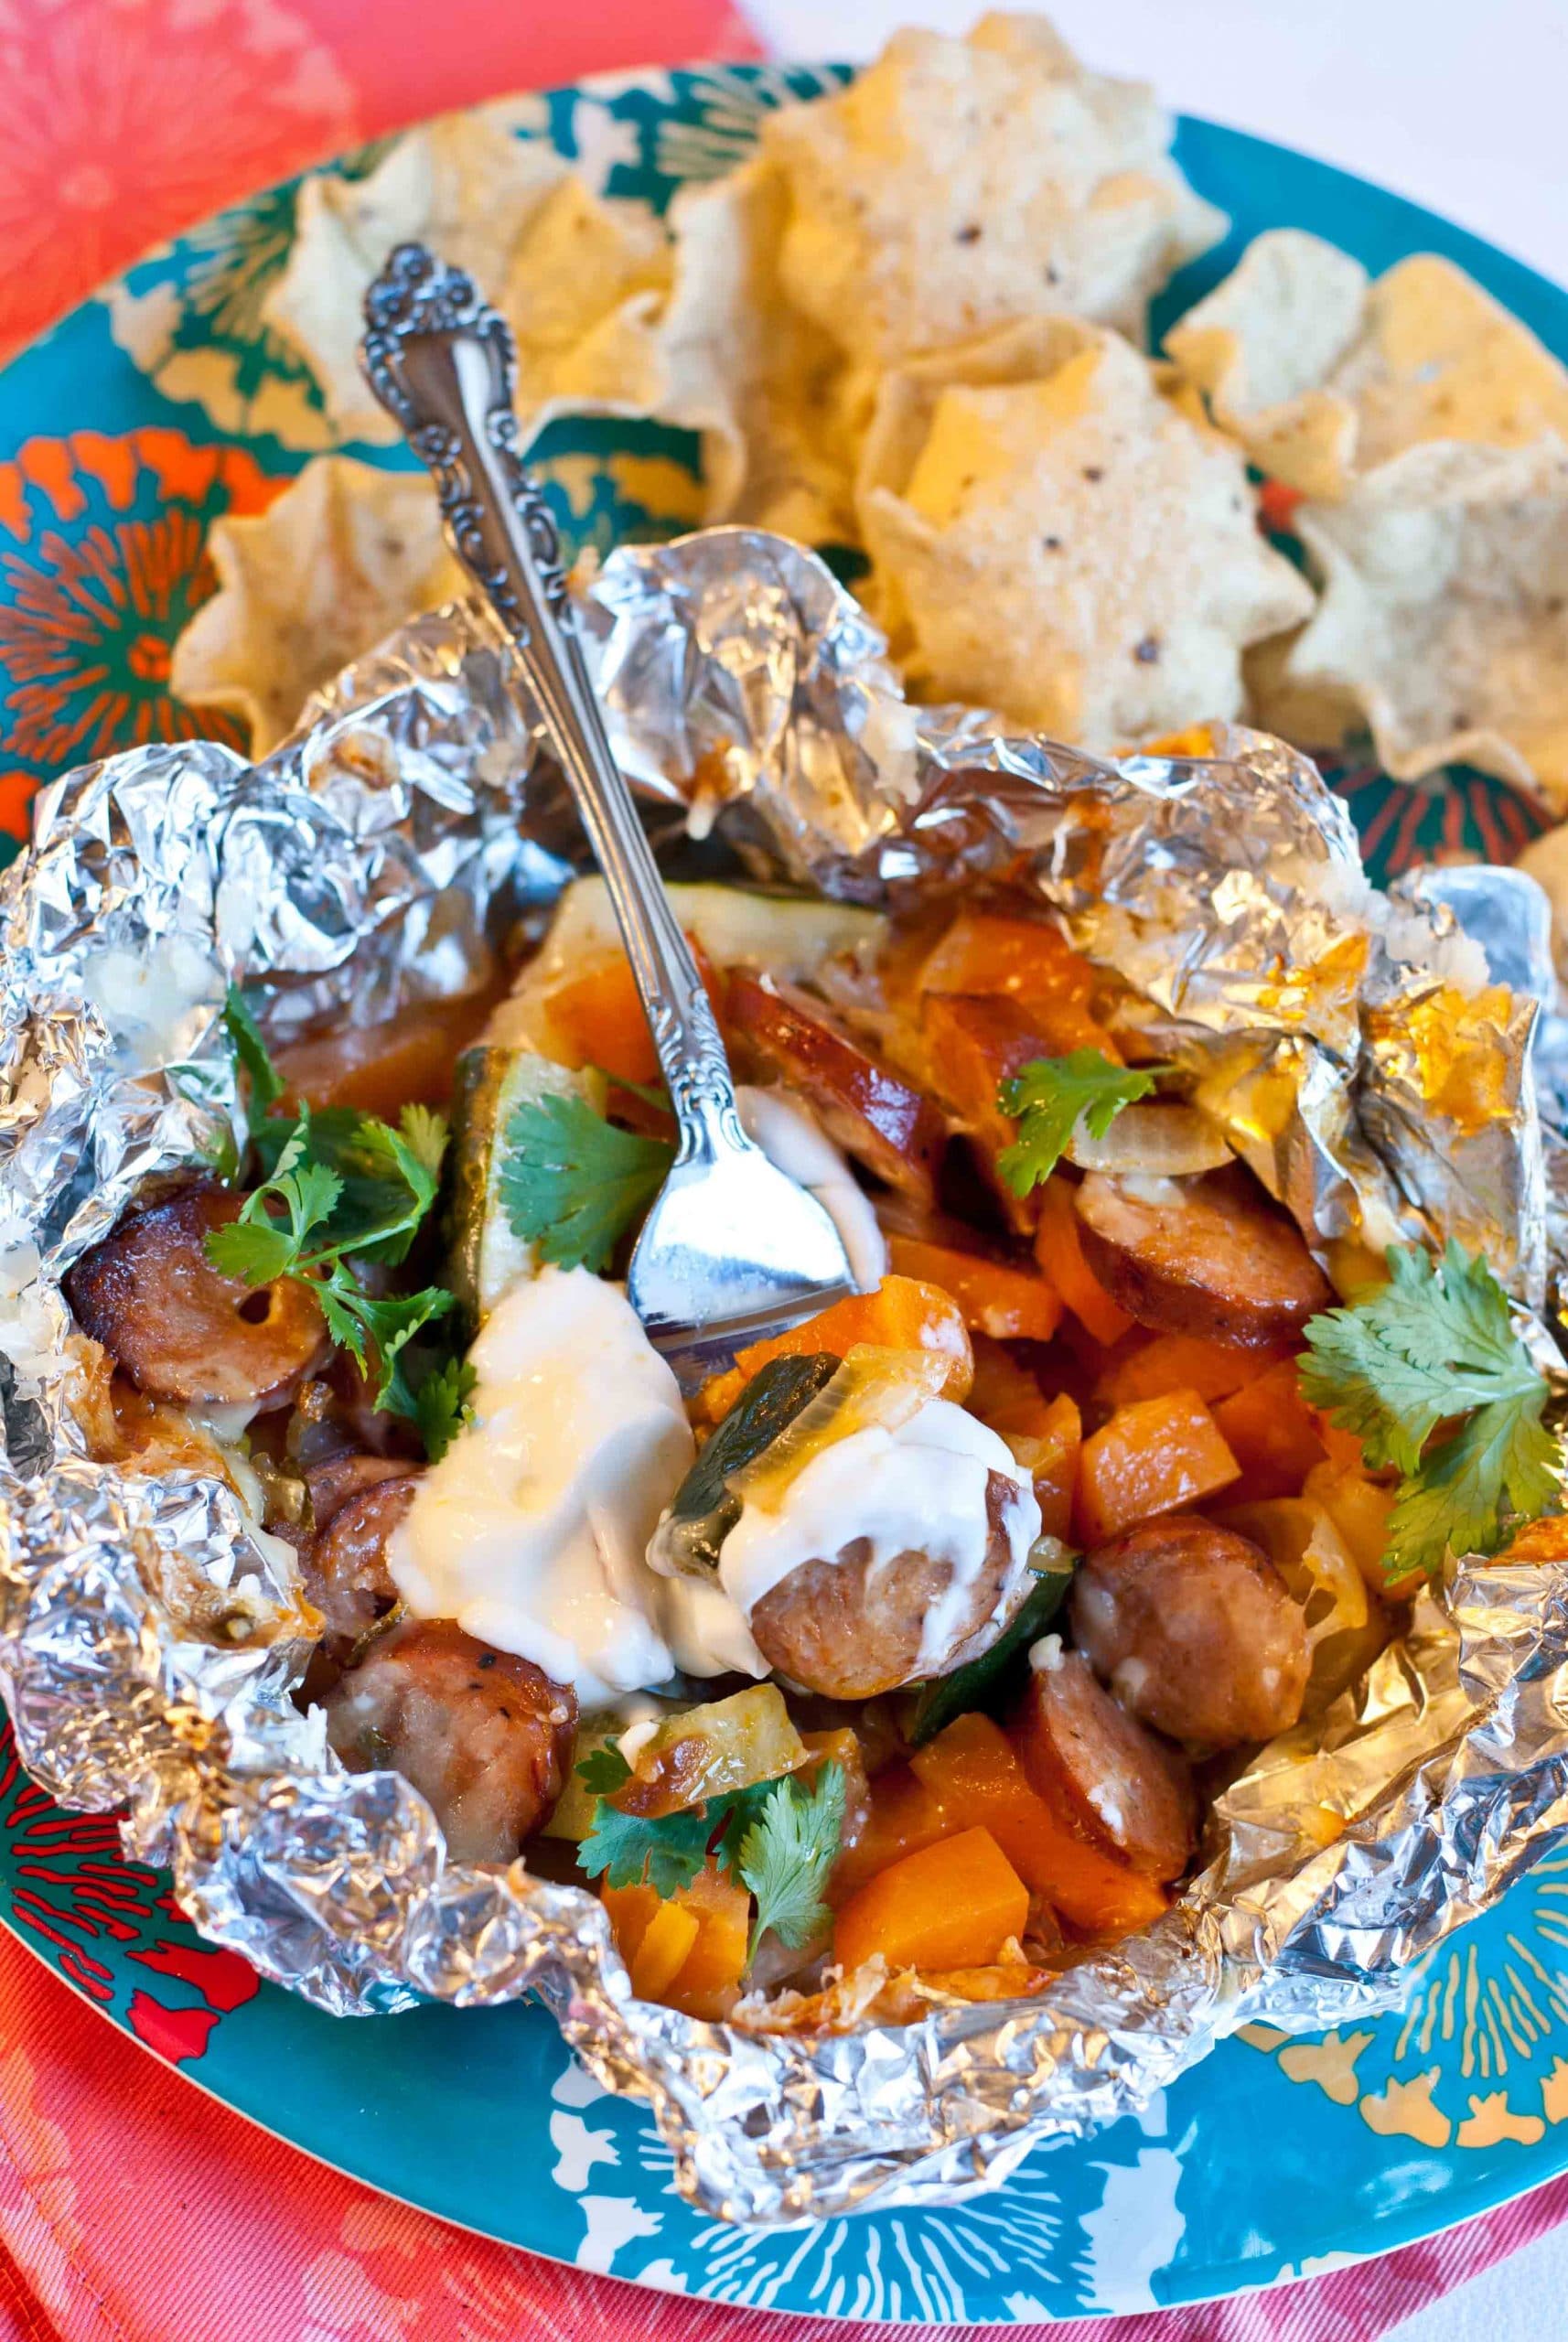 Grilled Chipotle Sweet Potato and Chicken Sausage Foil Packets | Neighborfoodblog.com